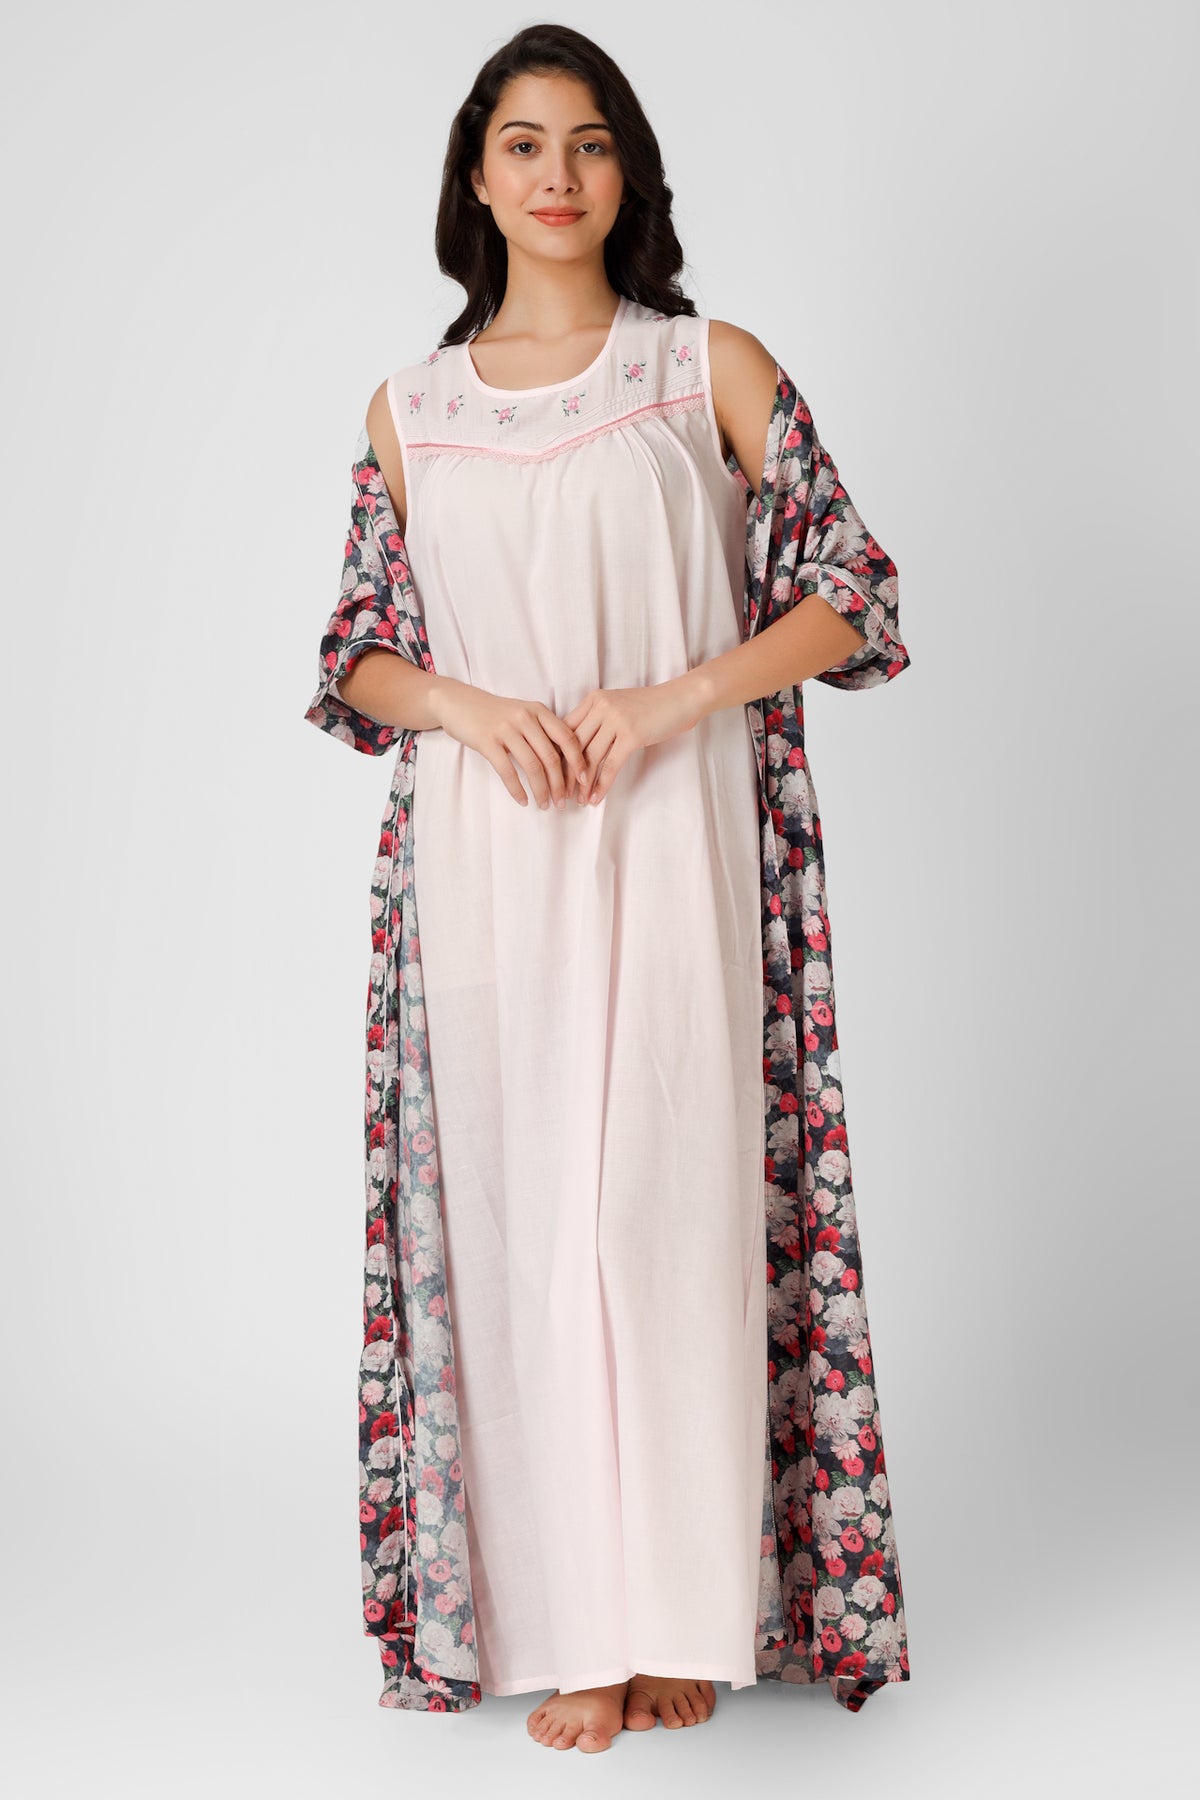 Xl (free Size) AS IN PHOTO Ladies Night Gown at Rs 400/piece in